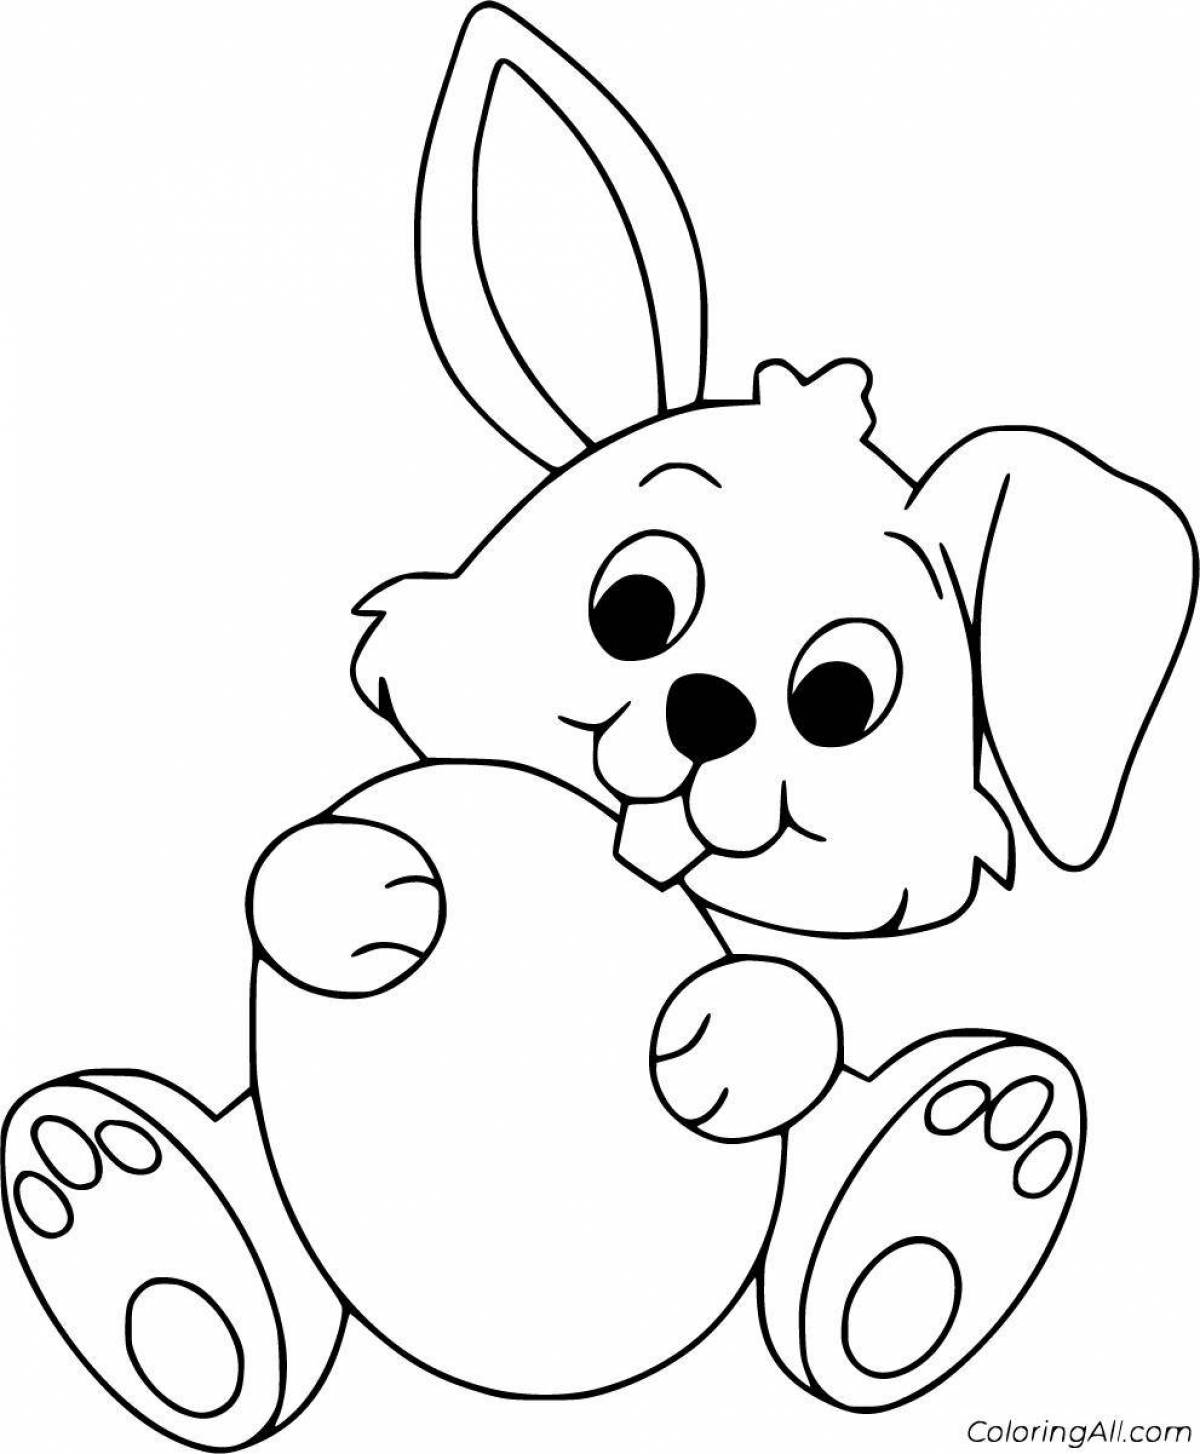 Amazing rabbit with a heart coloring book